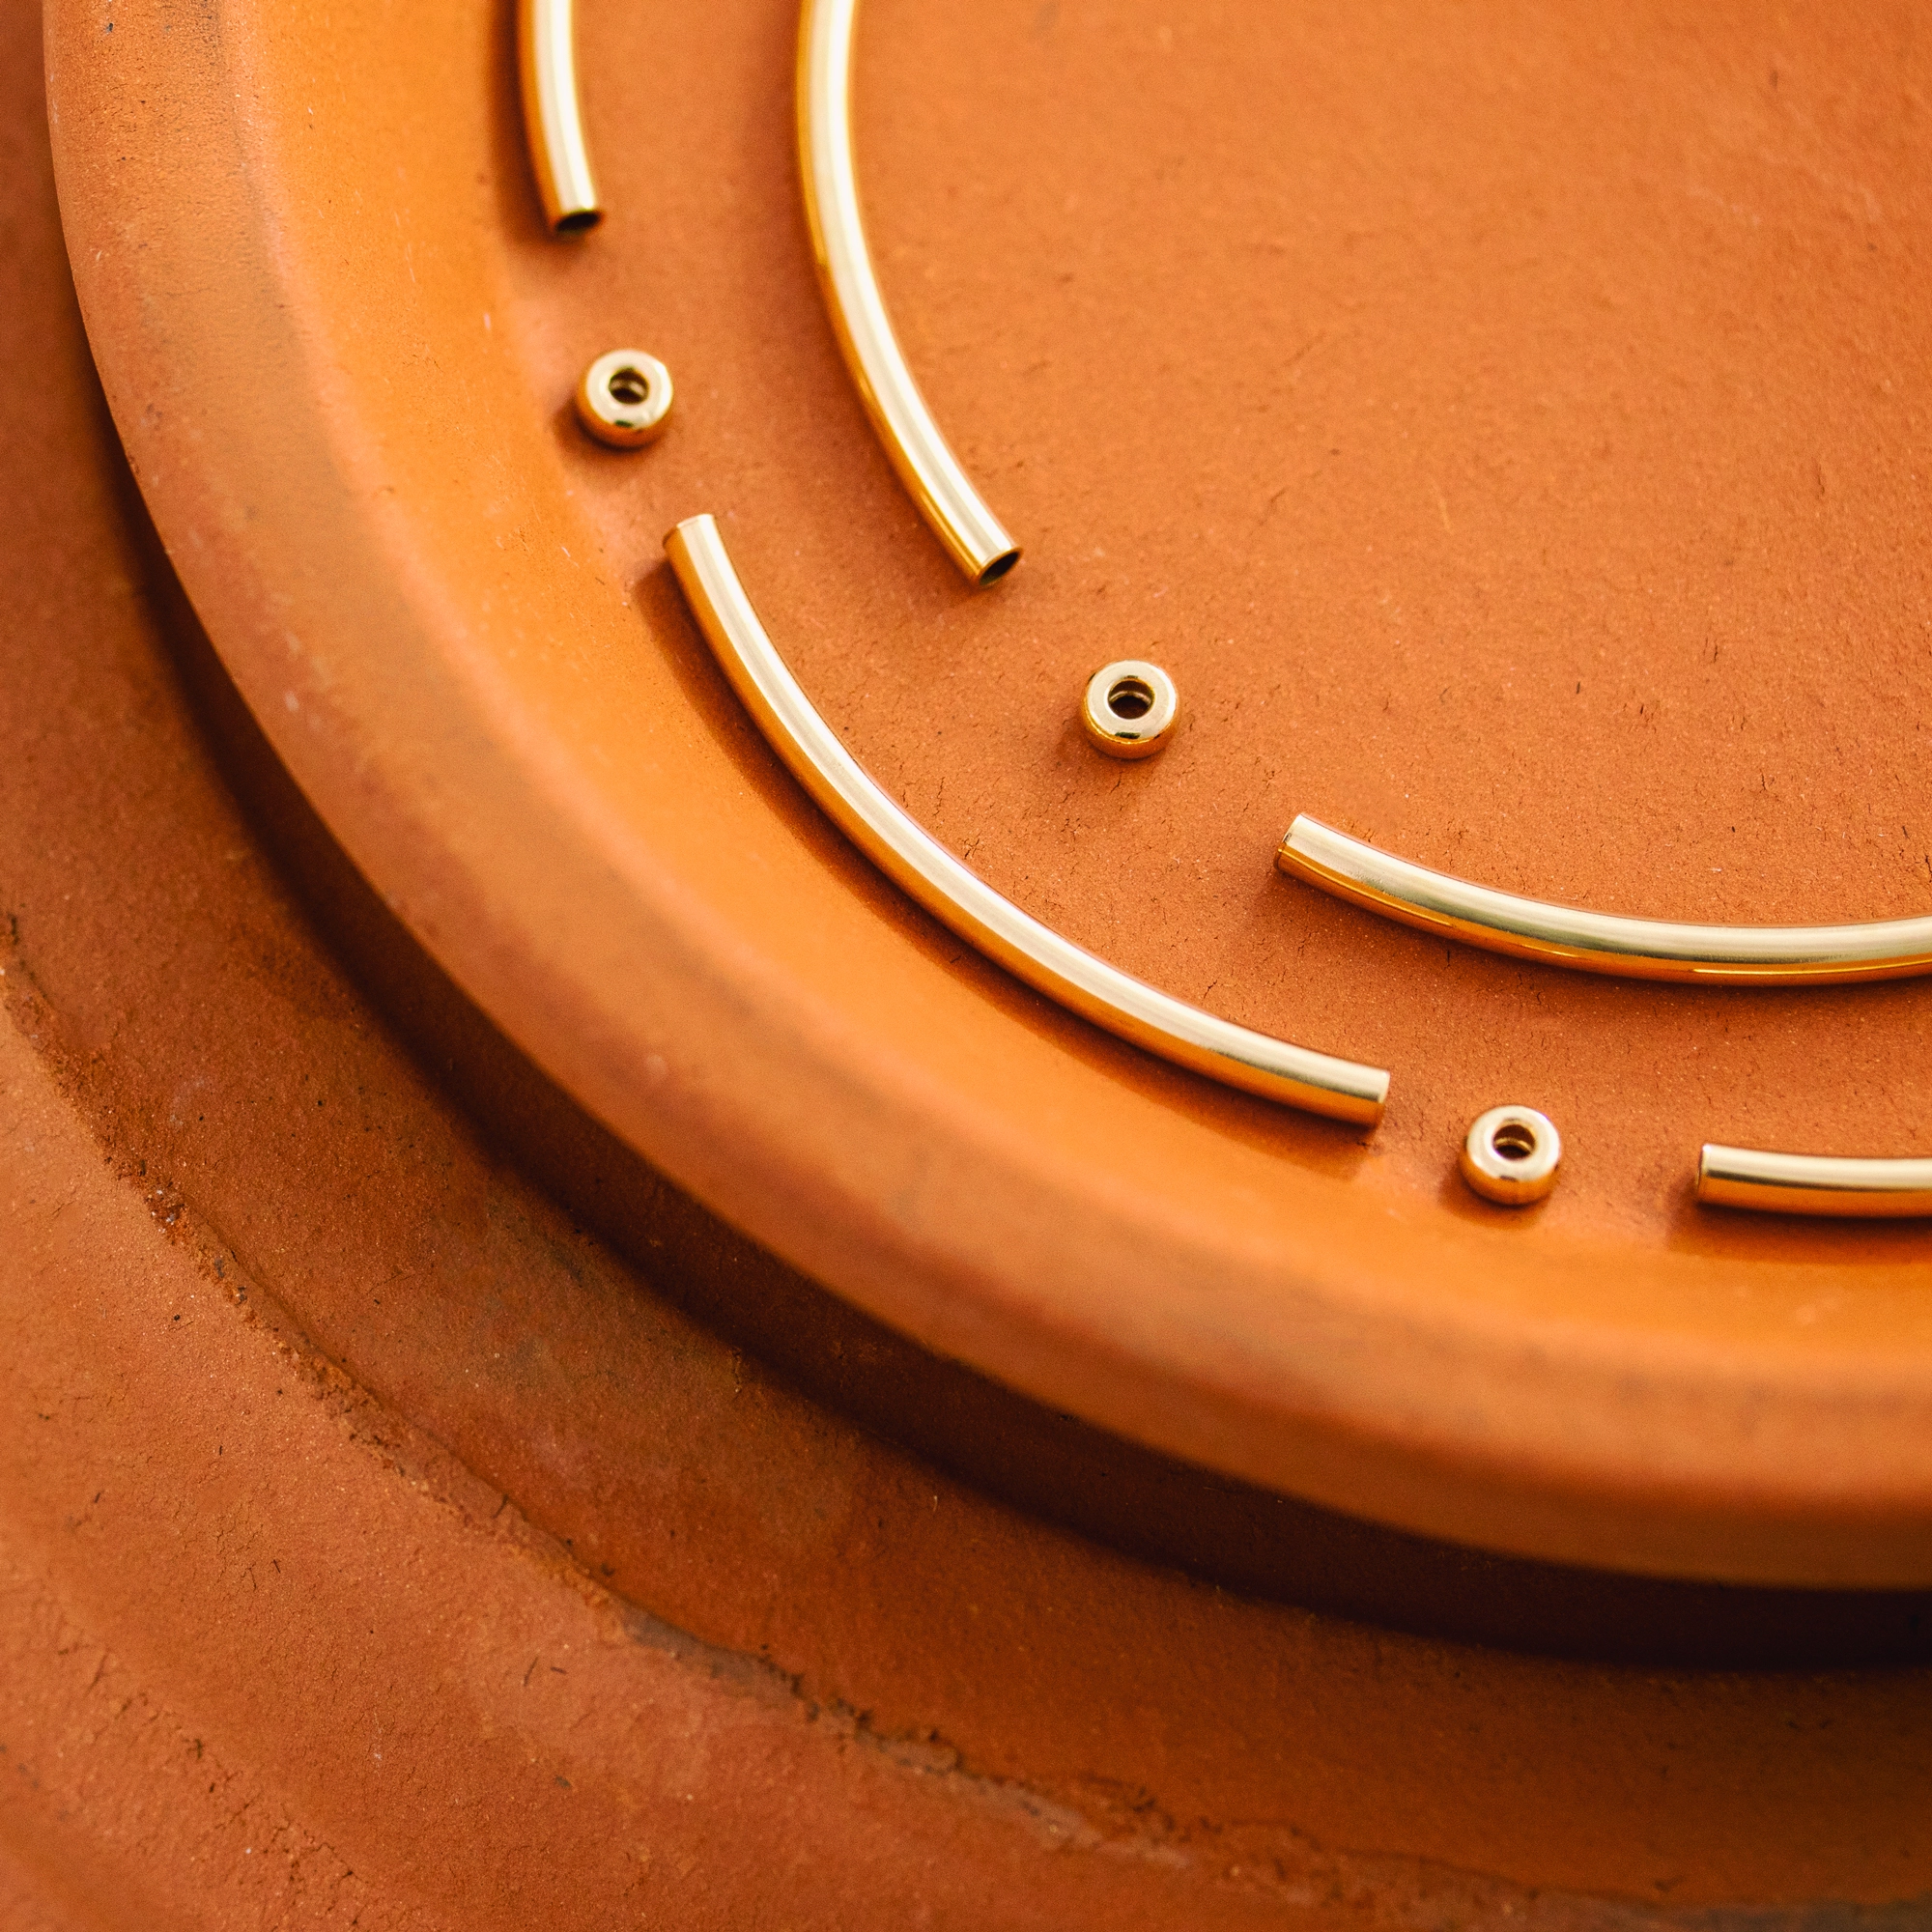 Gold-filled jewelry beads and tubes laying on terracotta pot